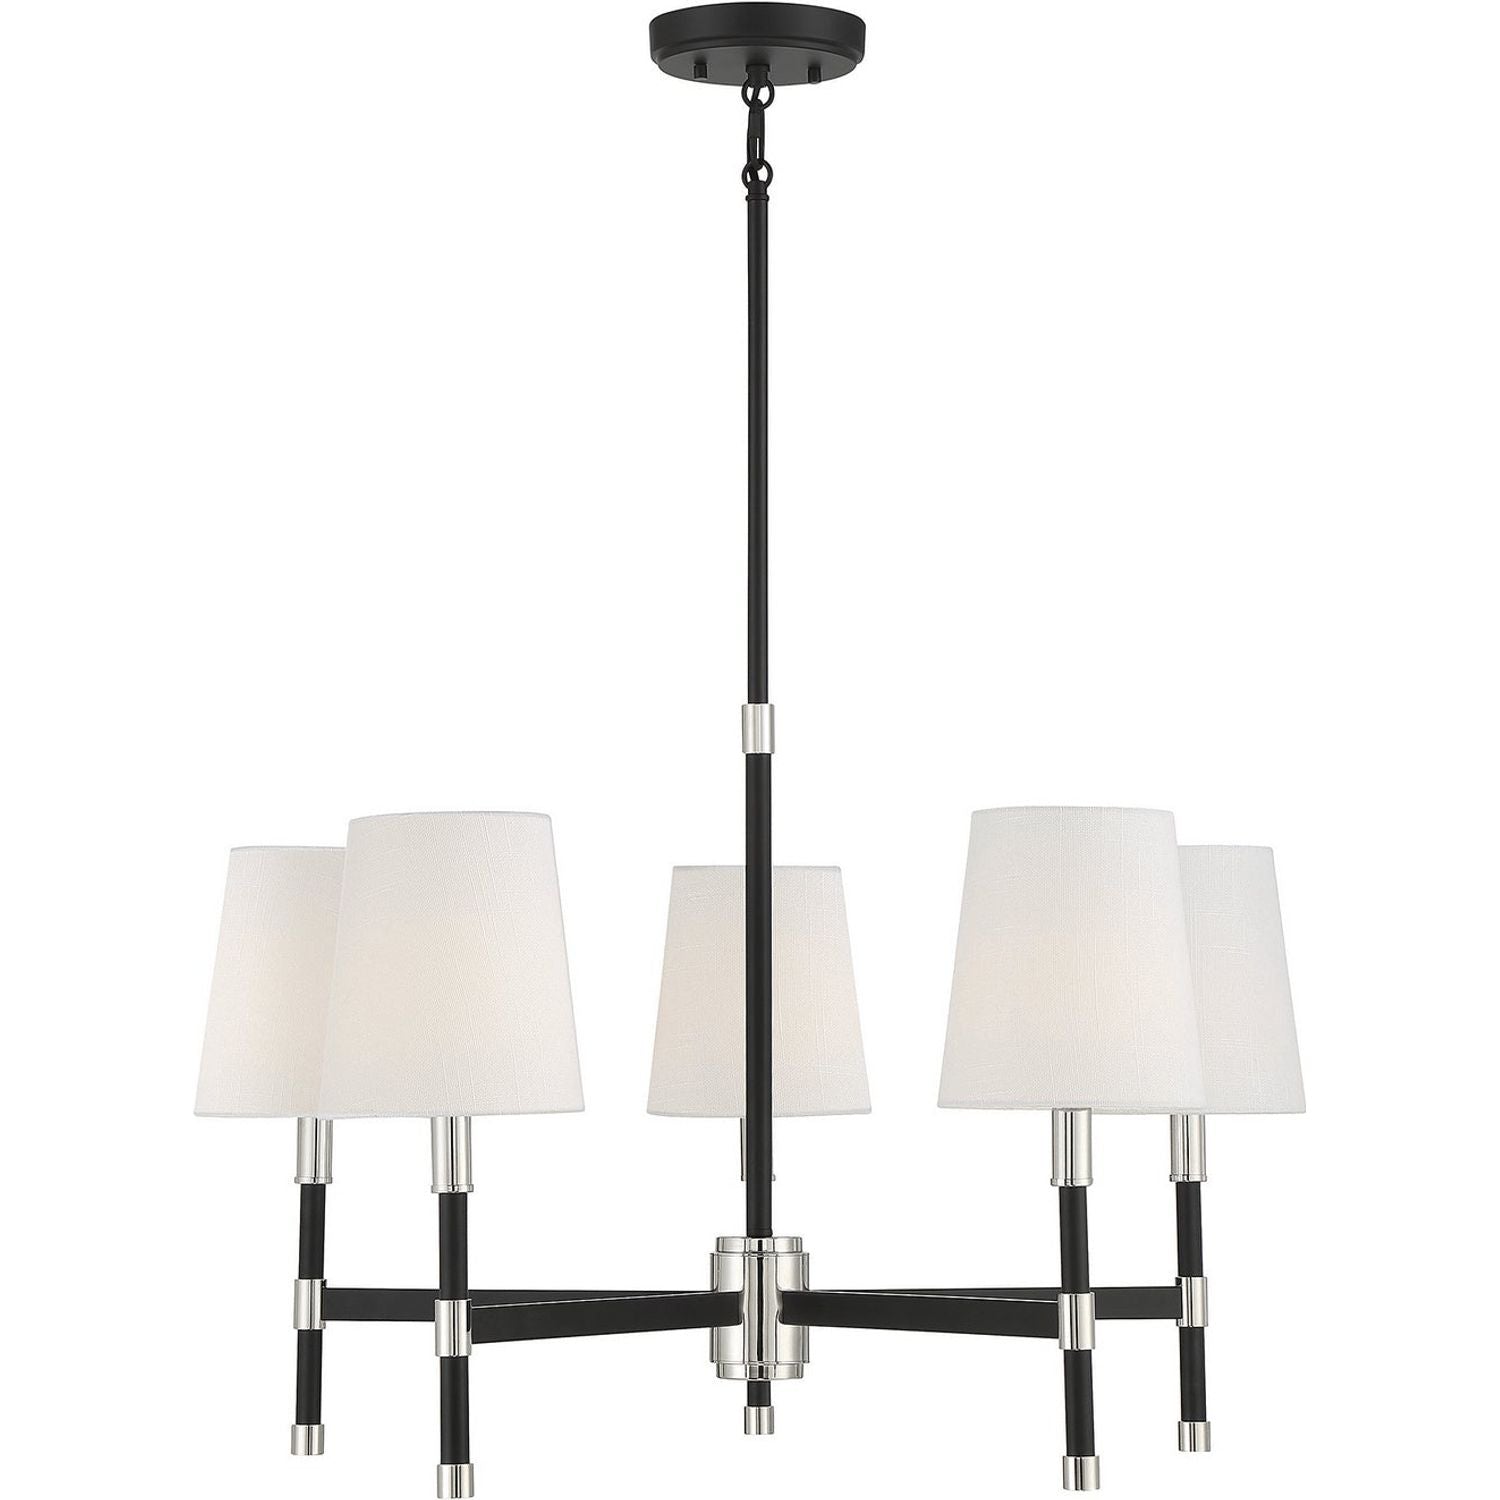 Savoy House - 1-1630-5-173 - Five Light Chandelier - Brody - Matte Black with Polished Nickel Accents